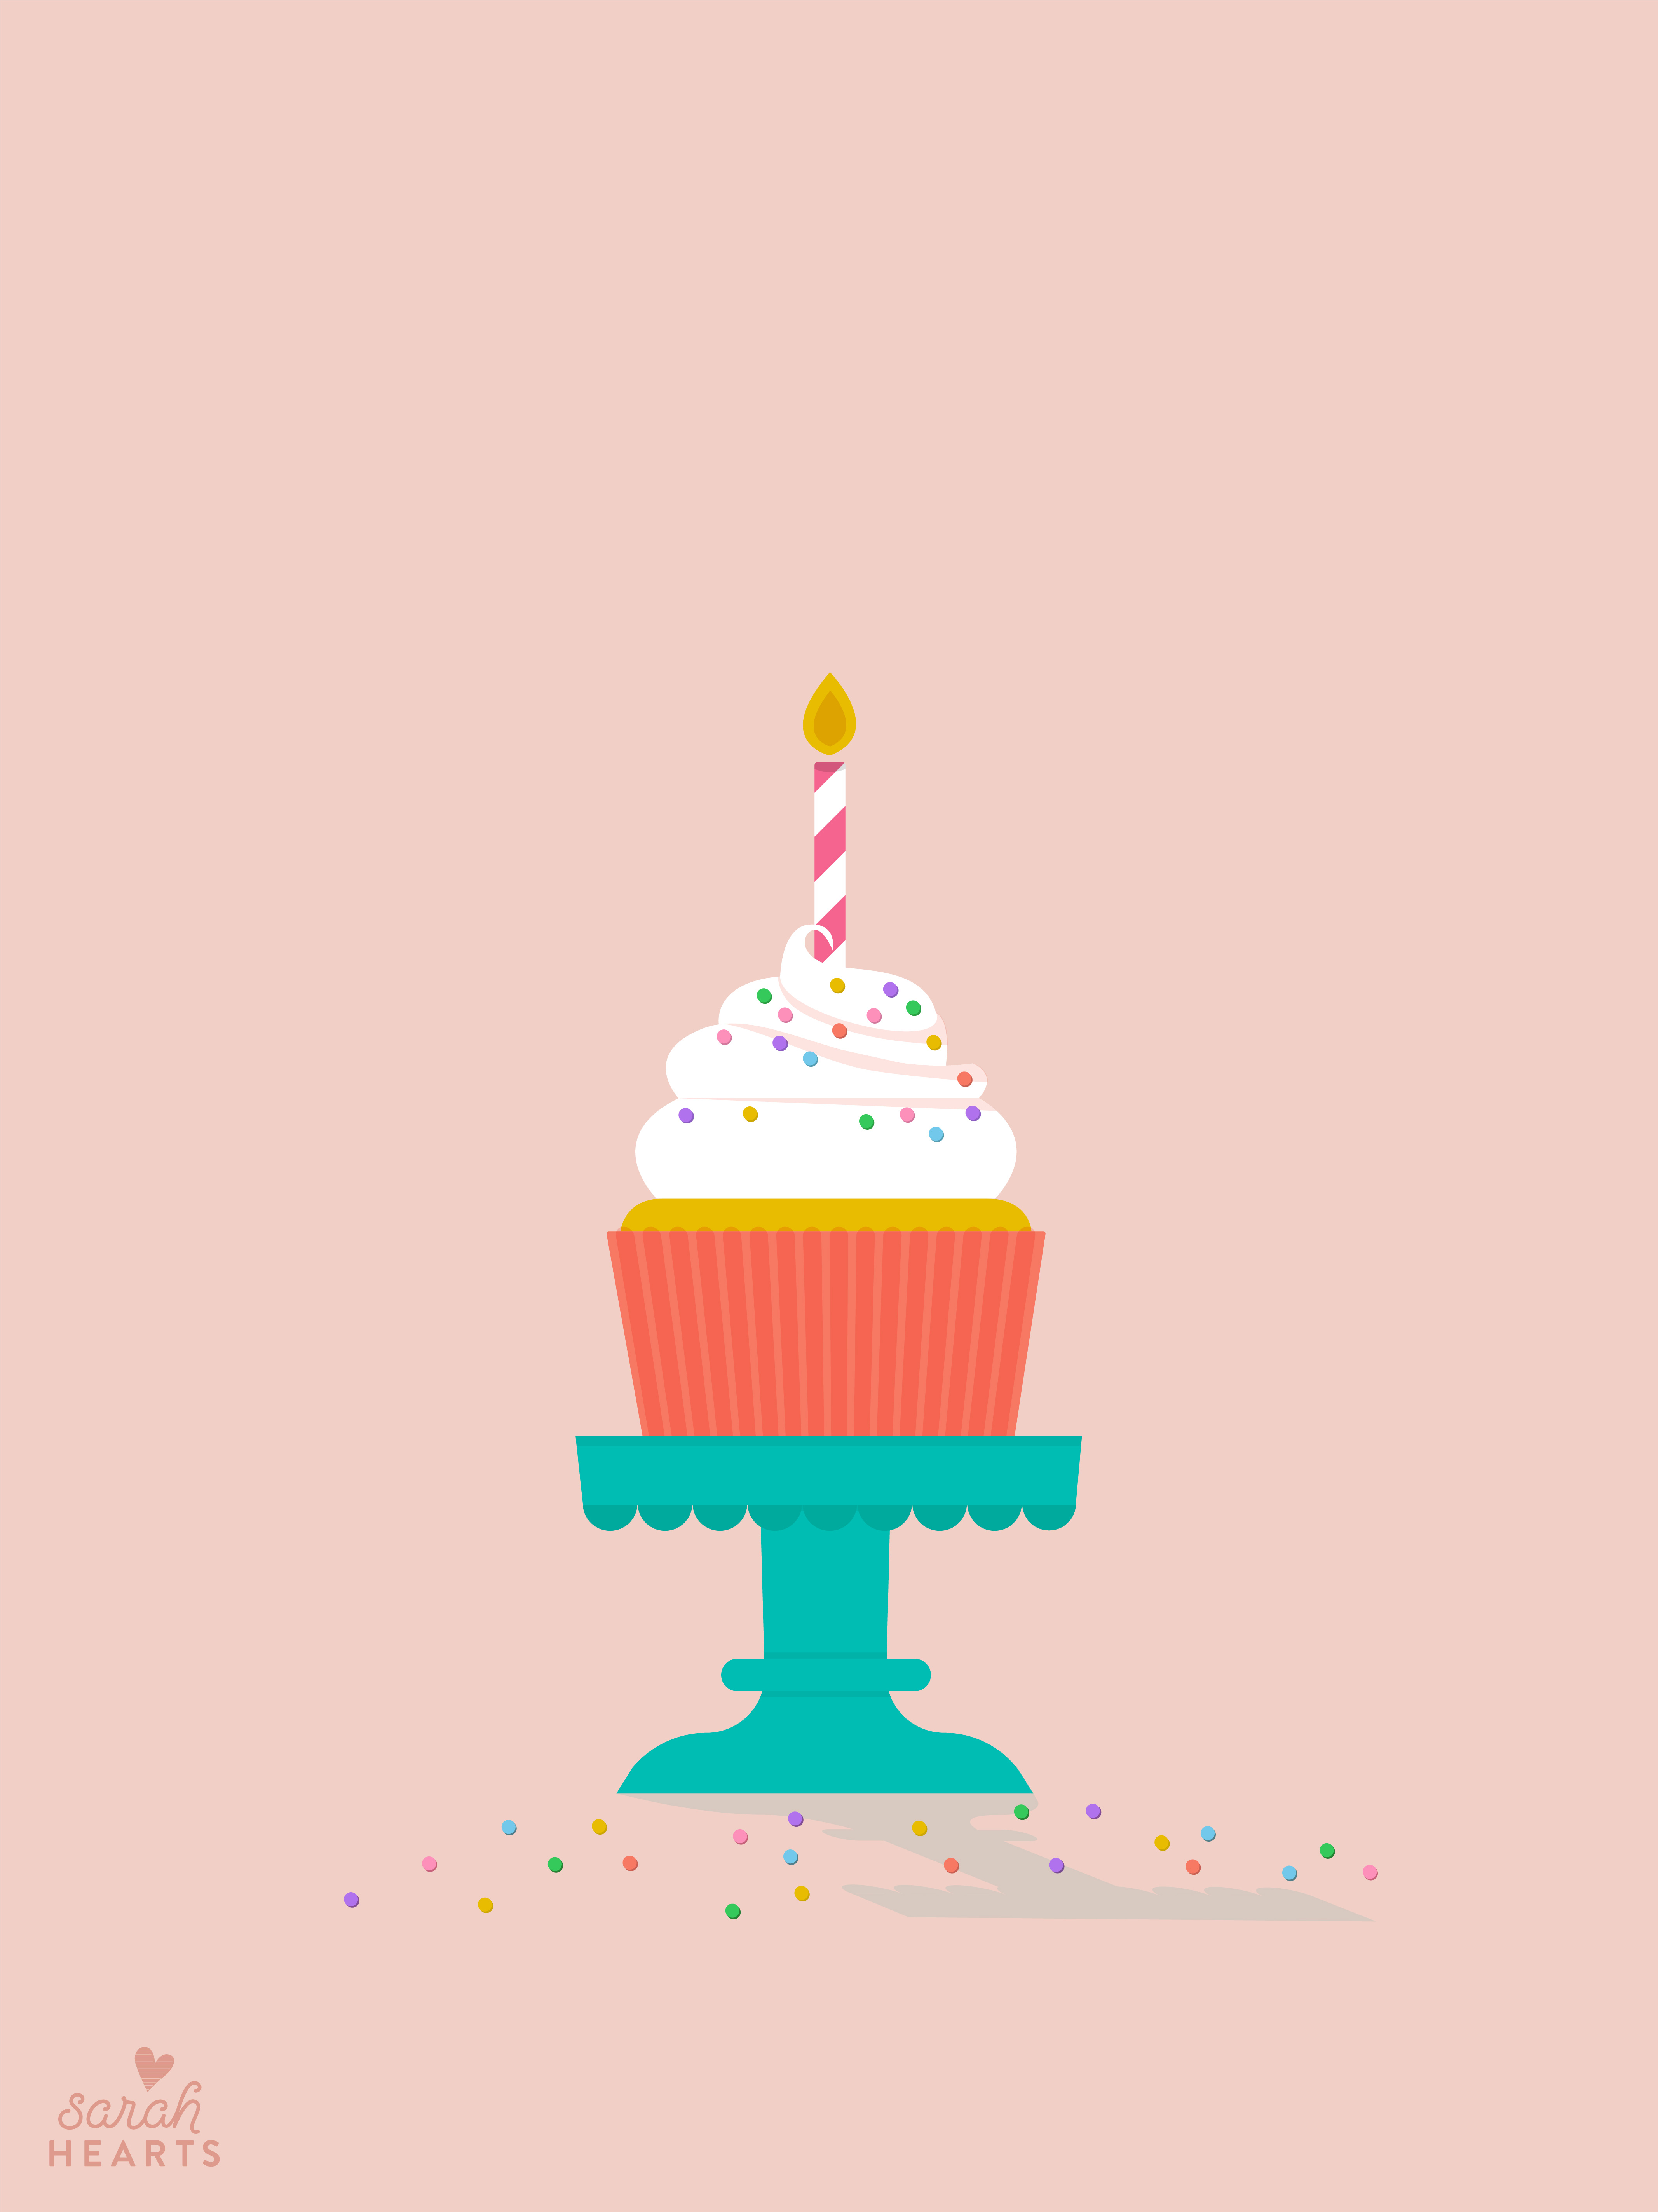 Realistic happy birthday wallpaper Template | PosterMyWall-cheohanoi.vn